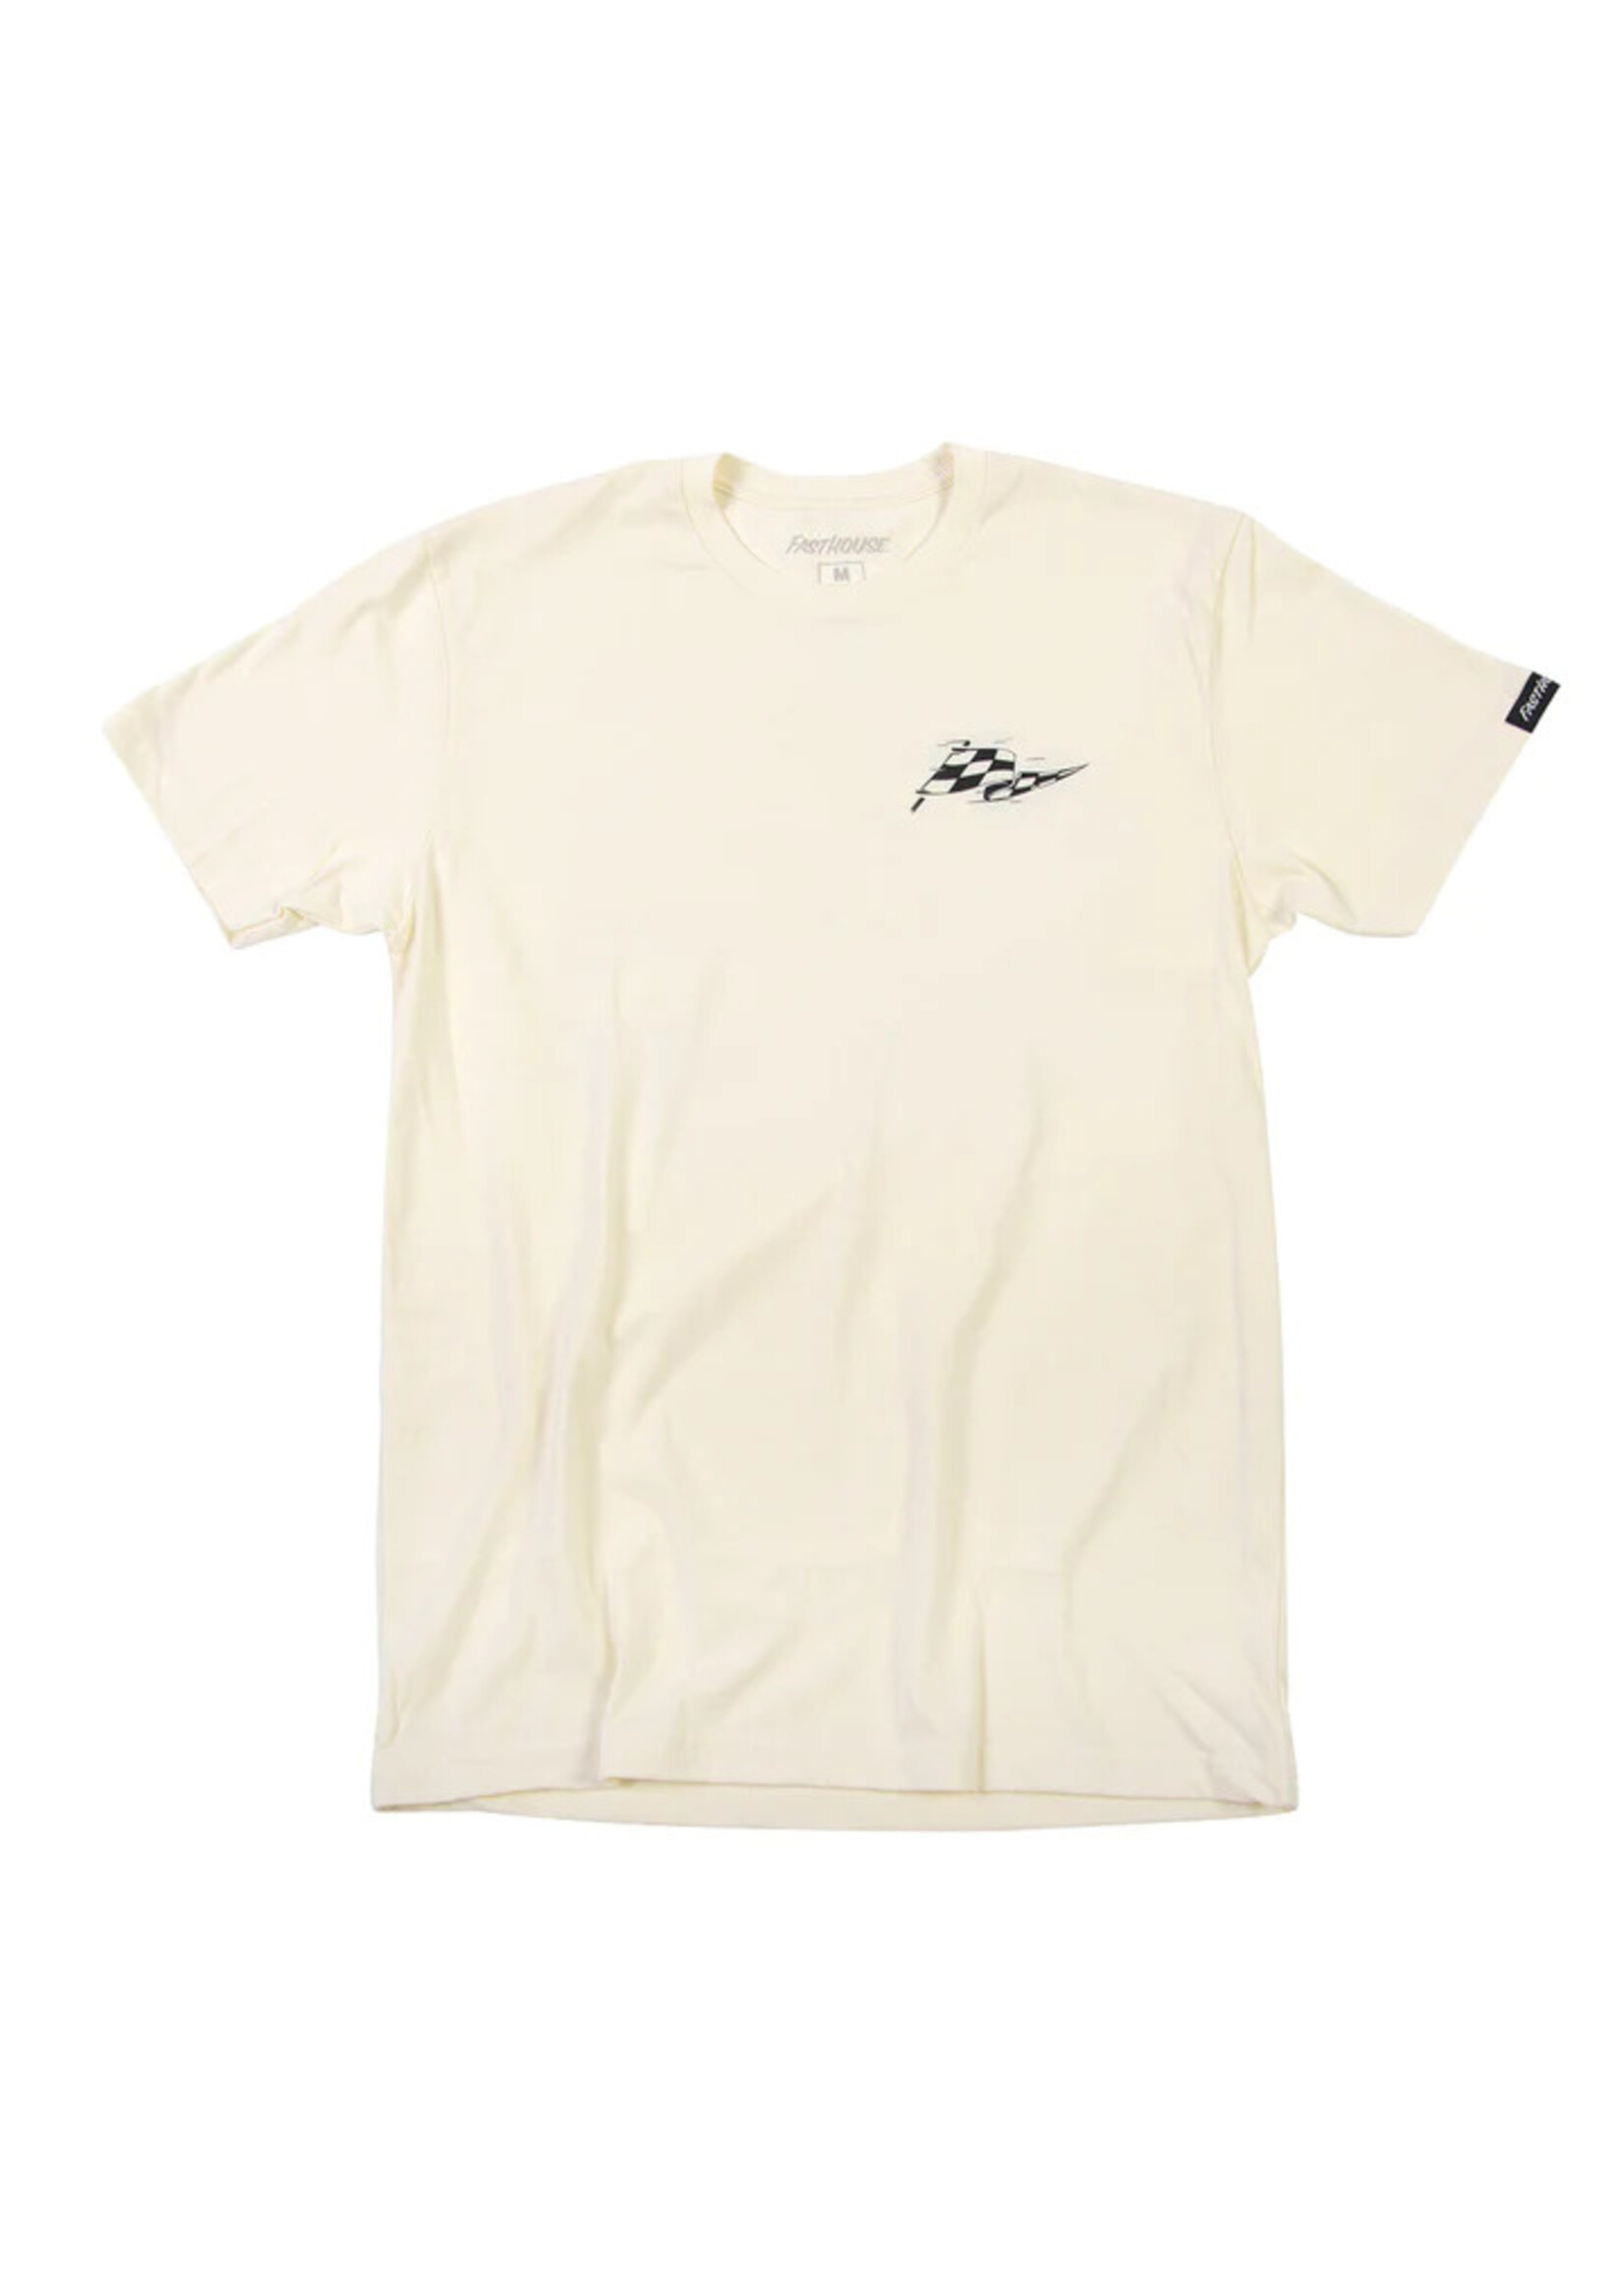 Fasthouse FASTHOUSE Sprinter Tee